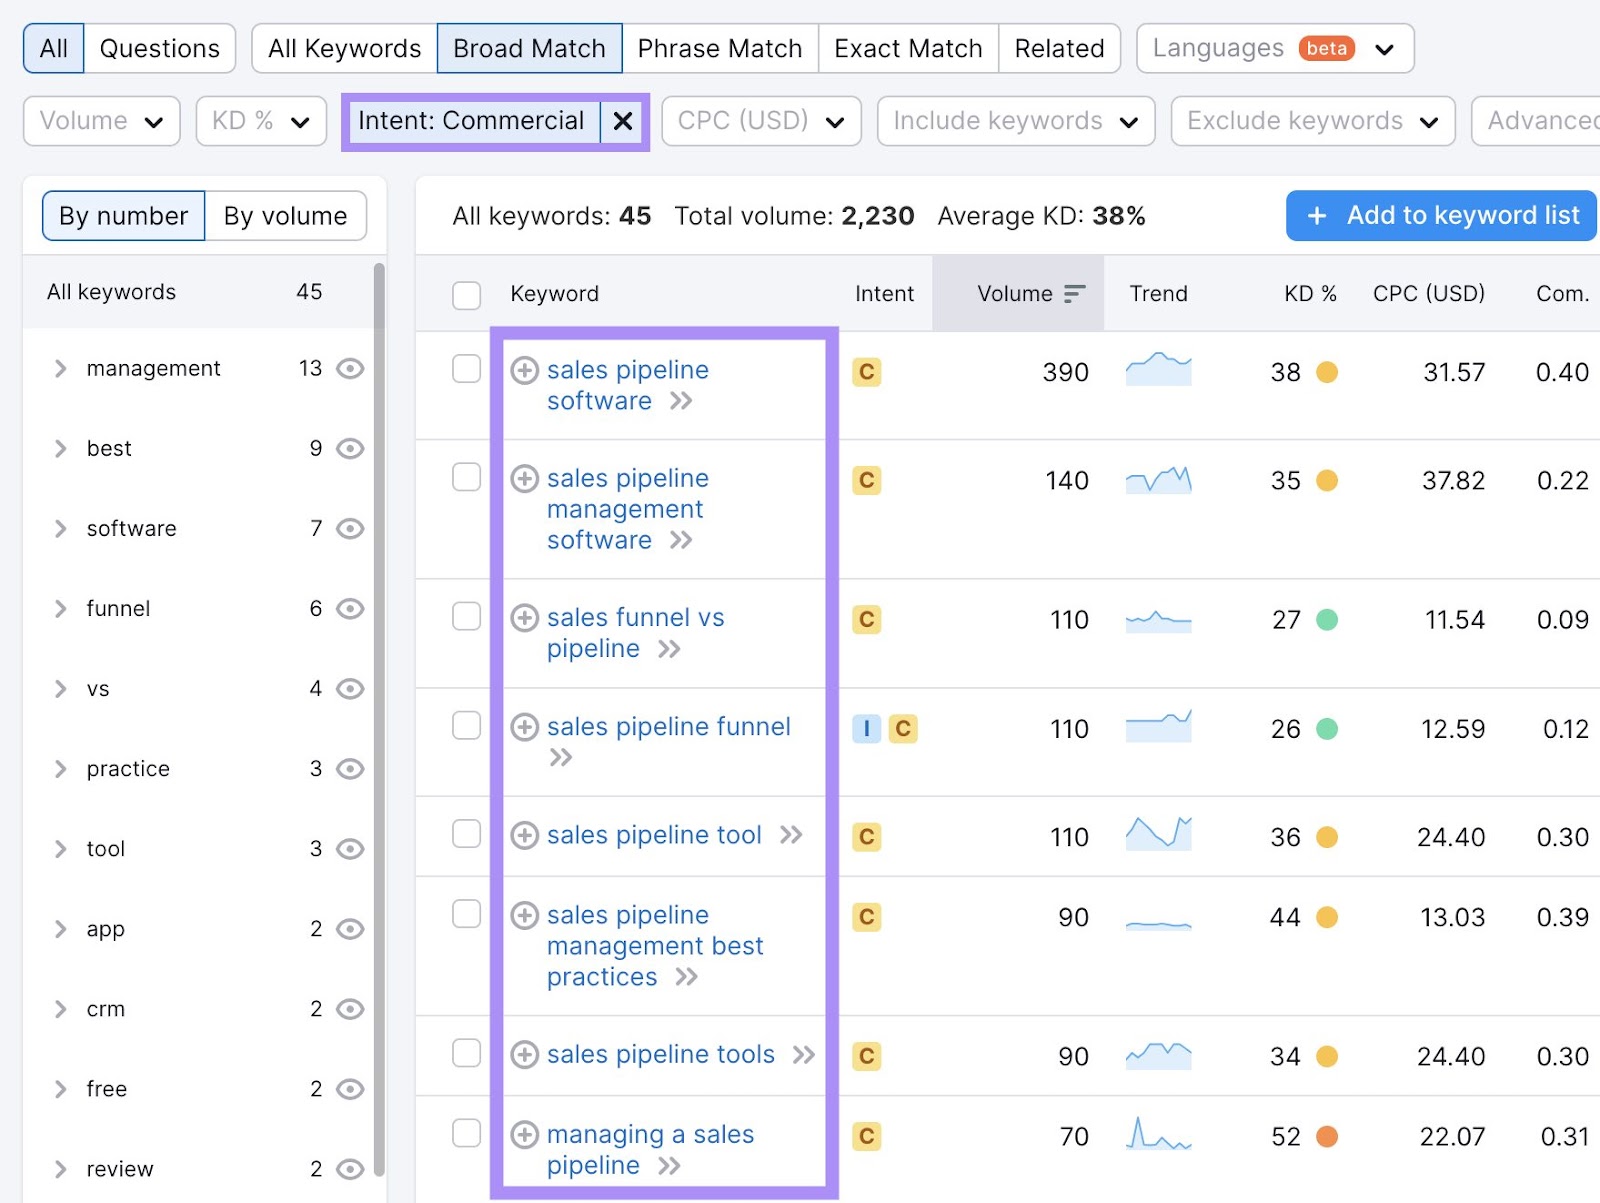 Keywords related to "sales pipeline" filtered by commercial search intent